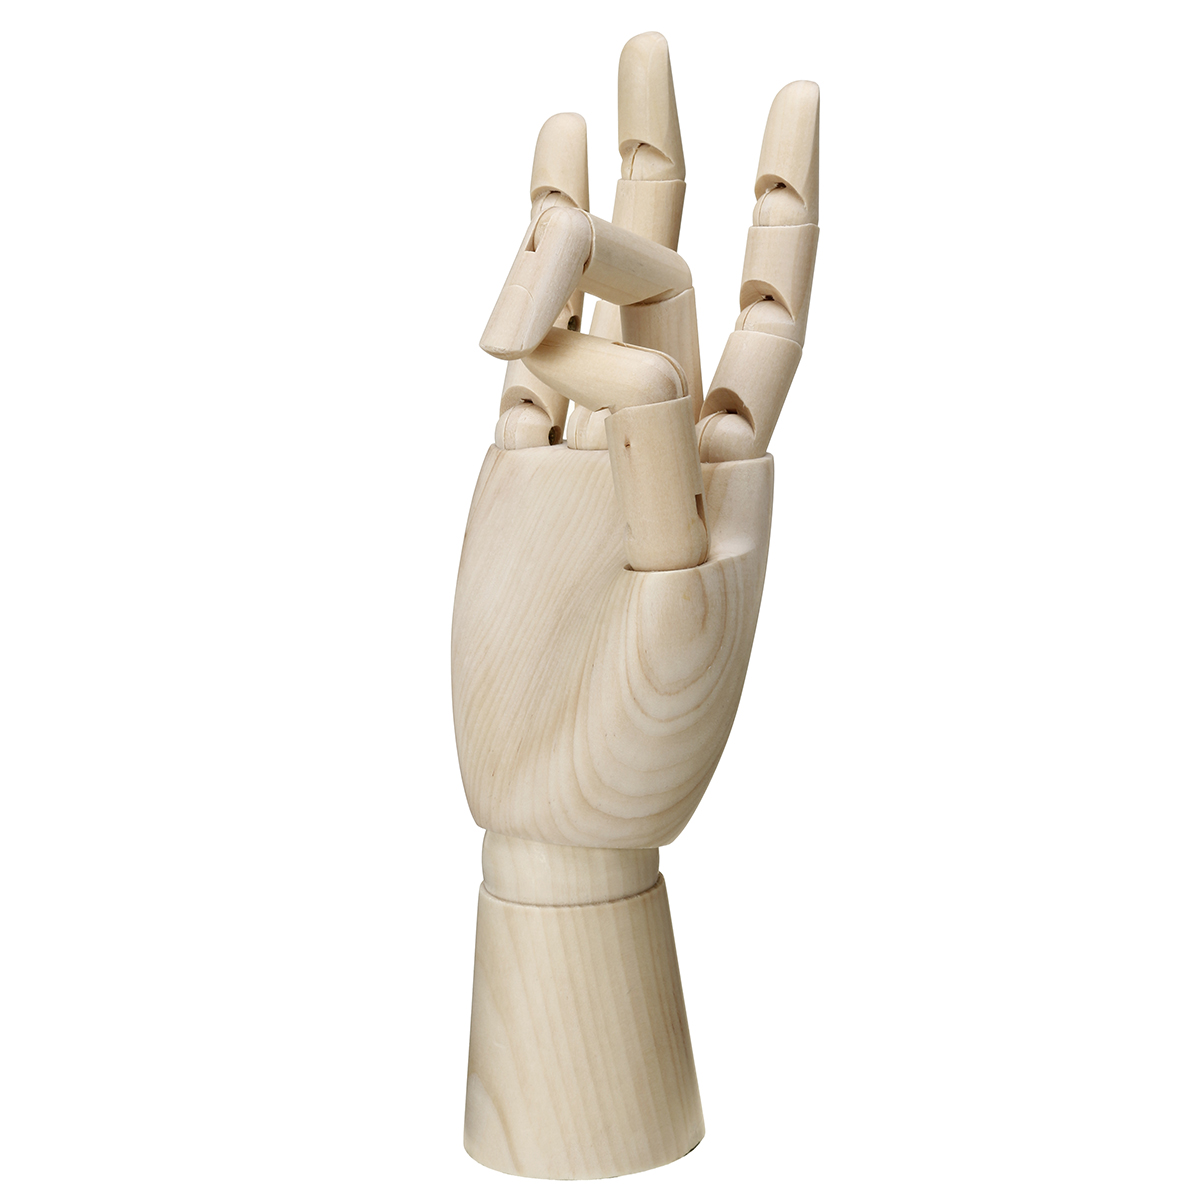 781012-Inch-Wooden-Hand-Body-Artist-Medical-Model-Flexible-Jointed-Wood-Sculpture-DIY-Education-1322443-10